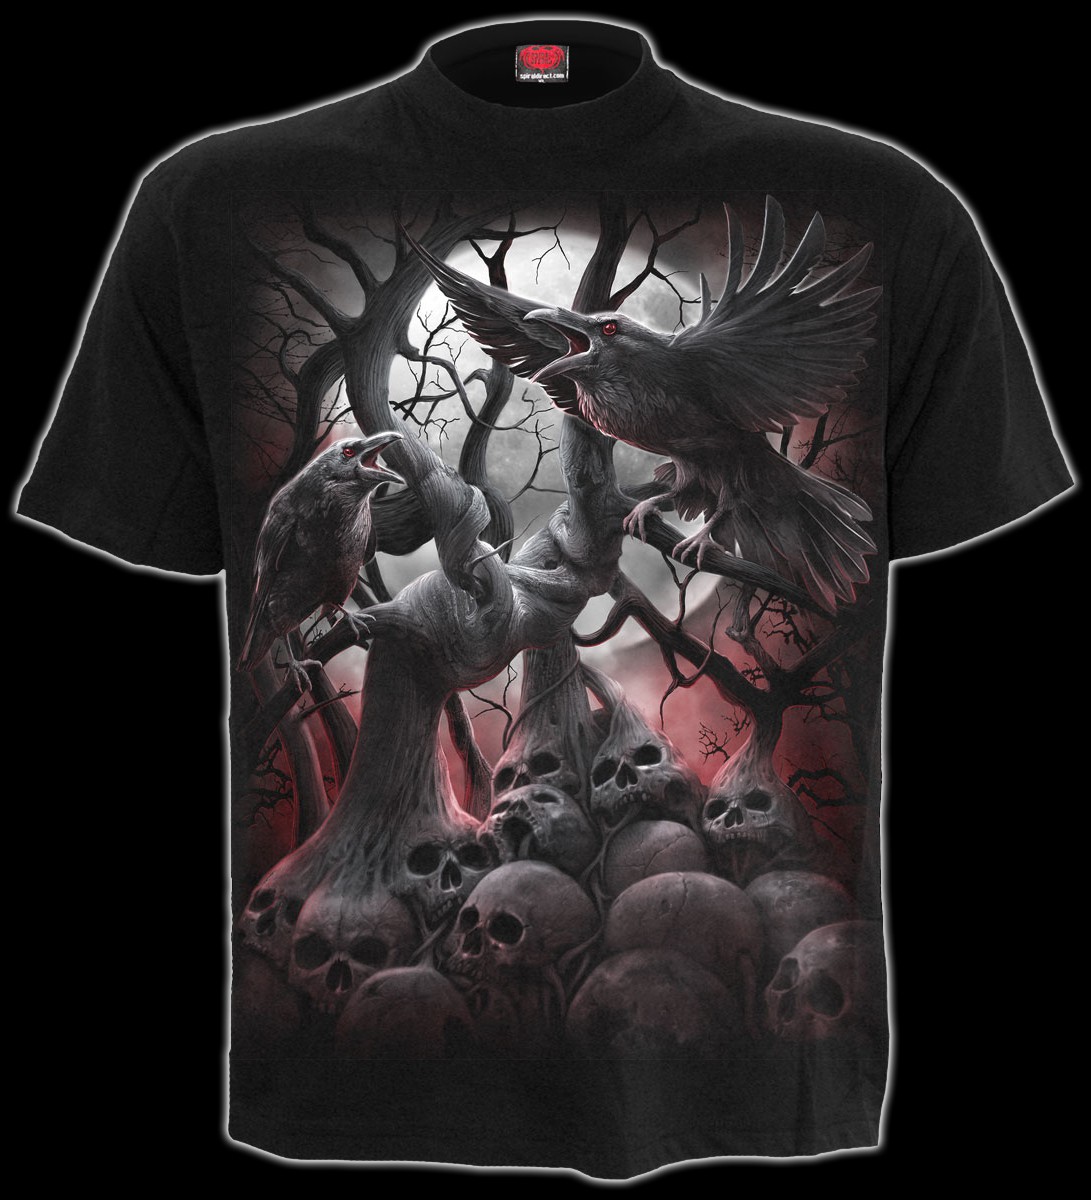 Dark Roots - T-Shirt with Skulls and Crows